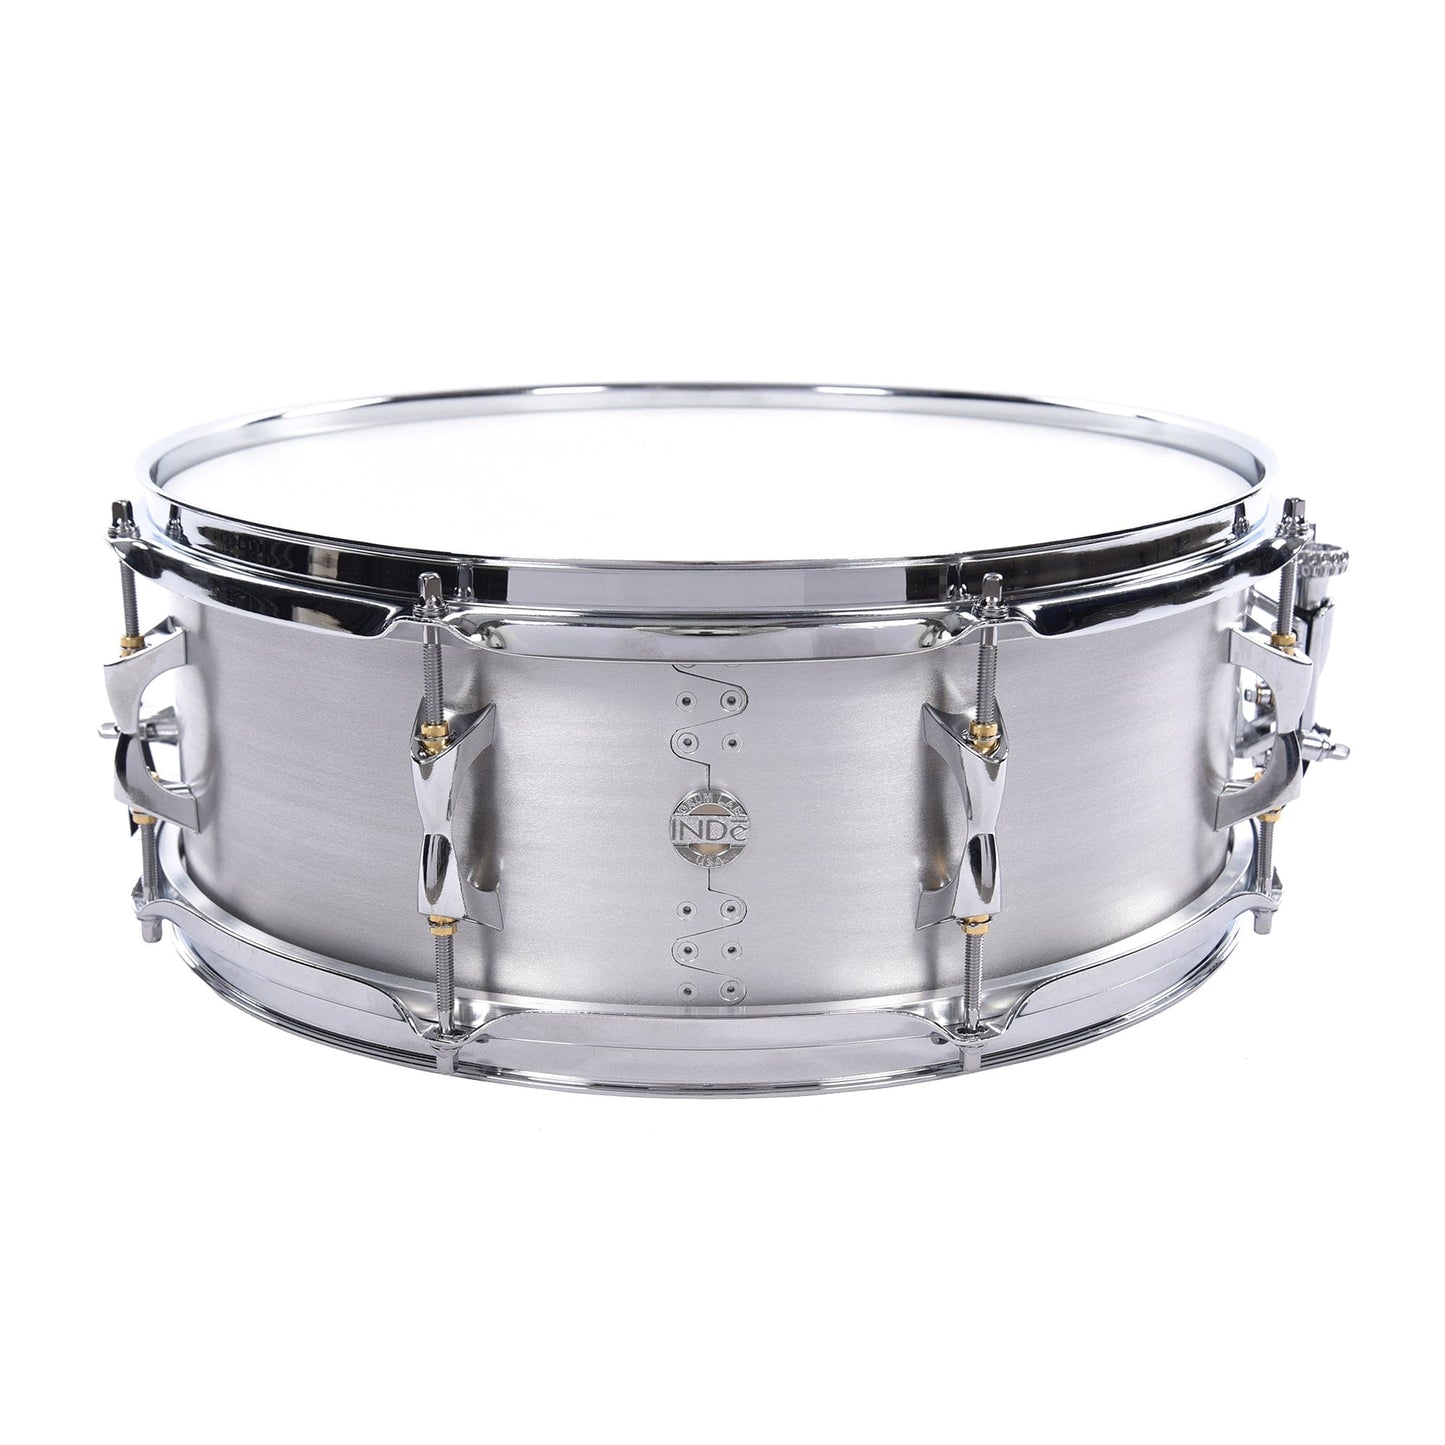 INDe Drum Lab 5.5x15 Kalamazoo Series Aluminum Snare Drum Drums and Percussion / Acoustic Drums / Snare